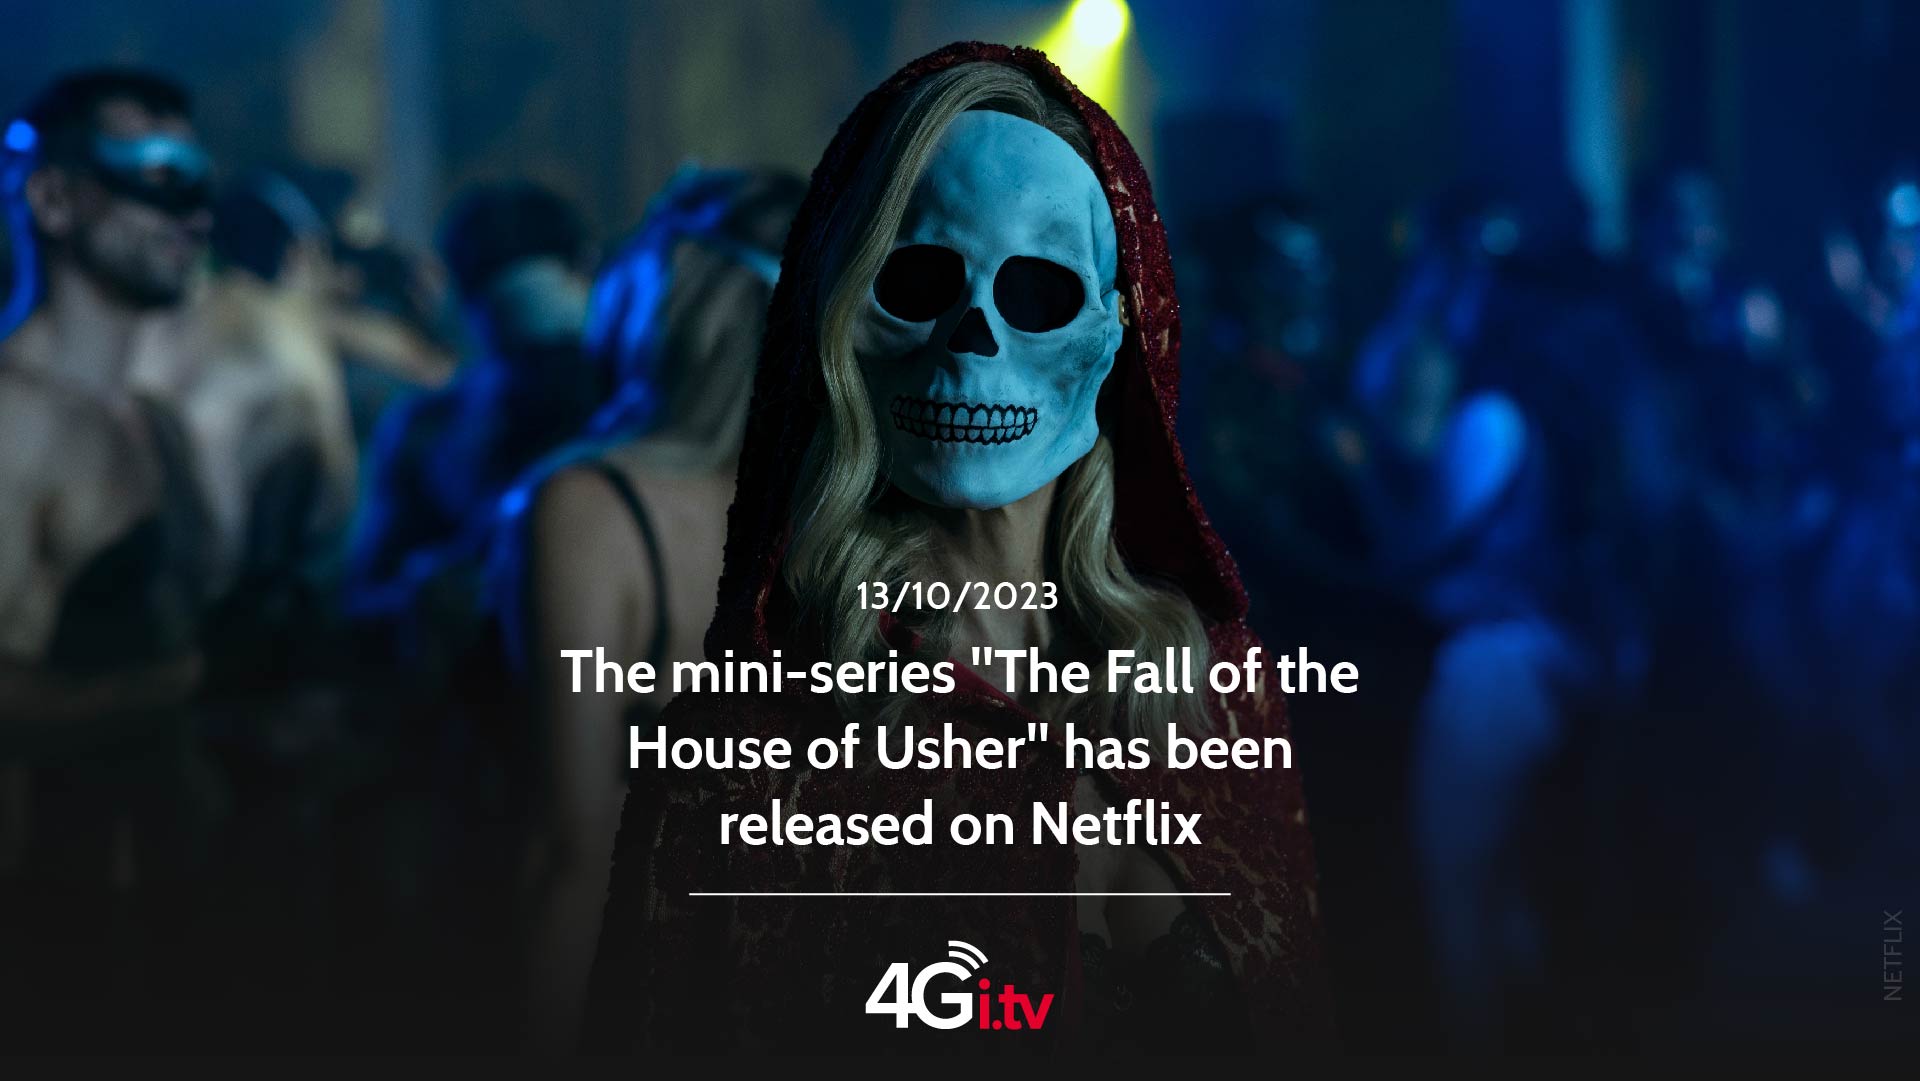 Lesen Sie mehr über den Artikel The mini-series “The Fall of the House of Usher” has been released on Netflix